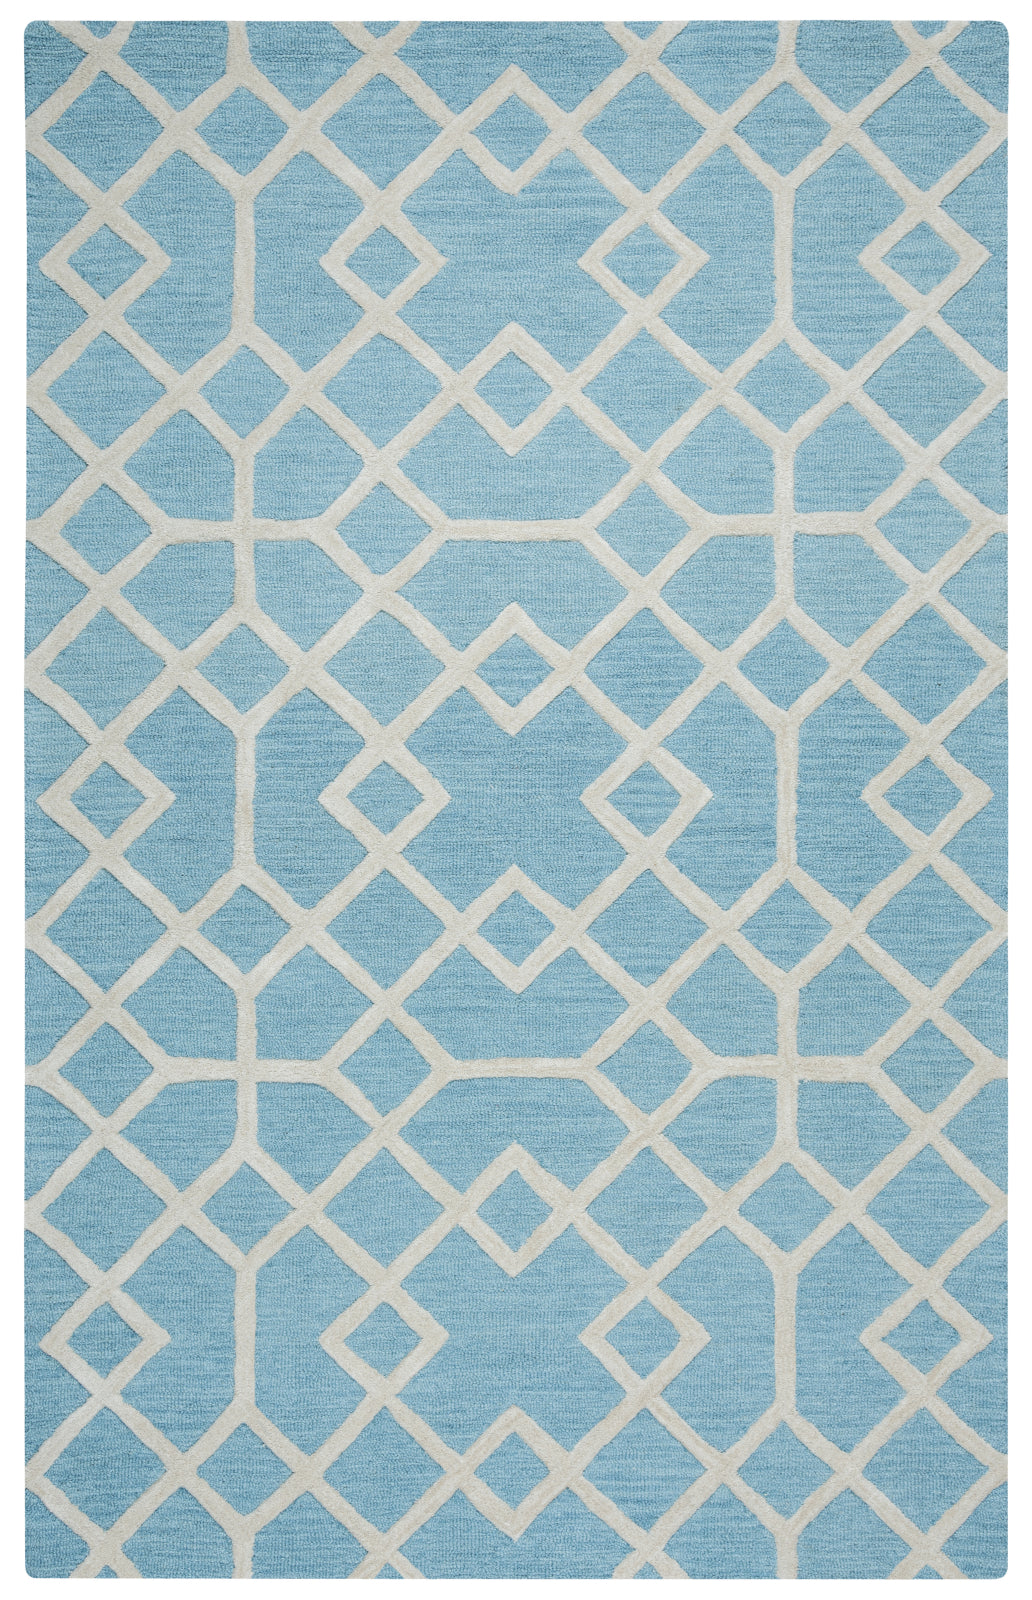 Rizzy Caterine CE9487 Blue Area Rug main image